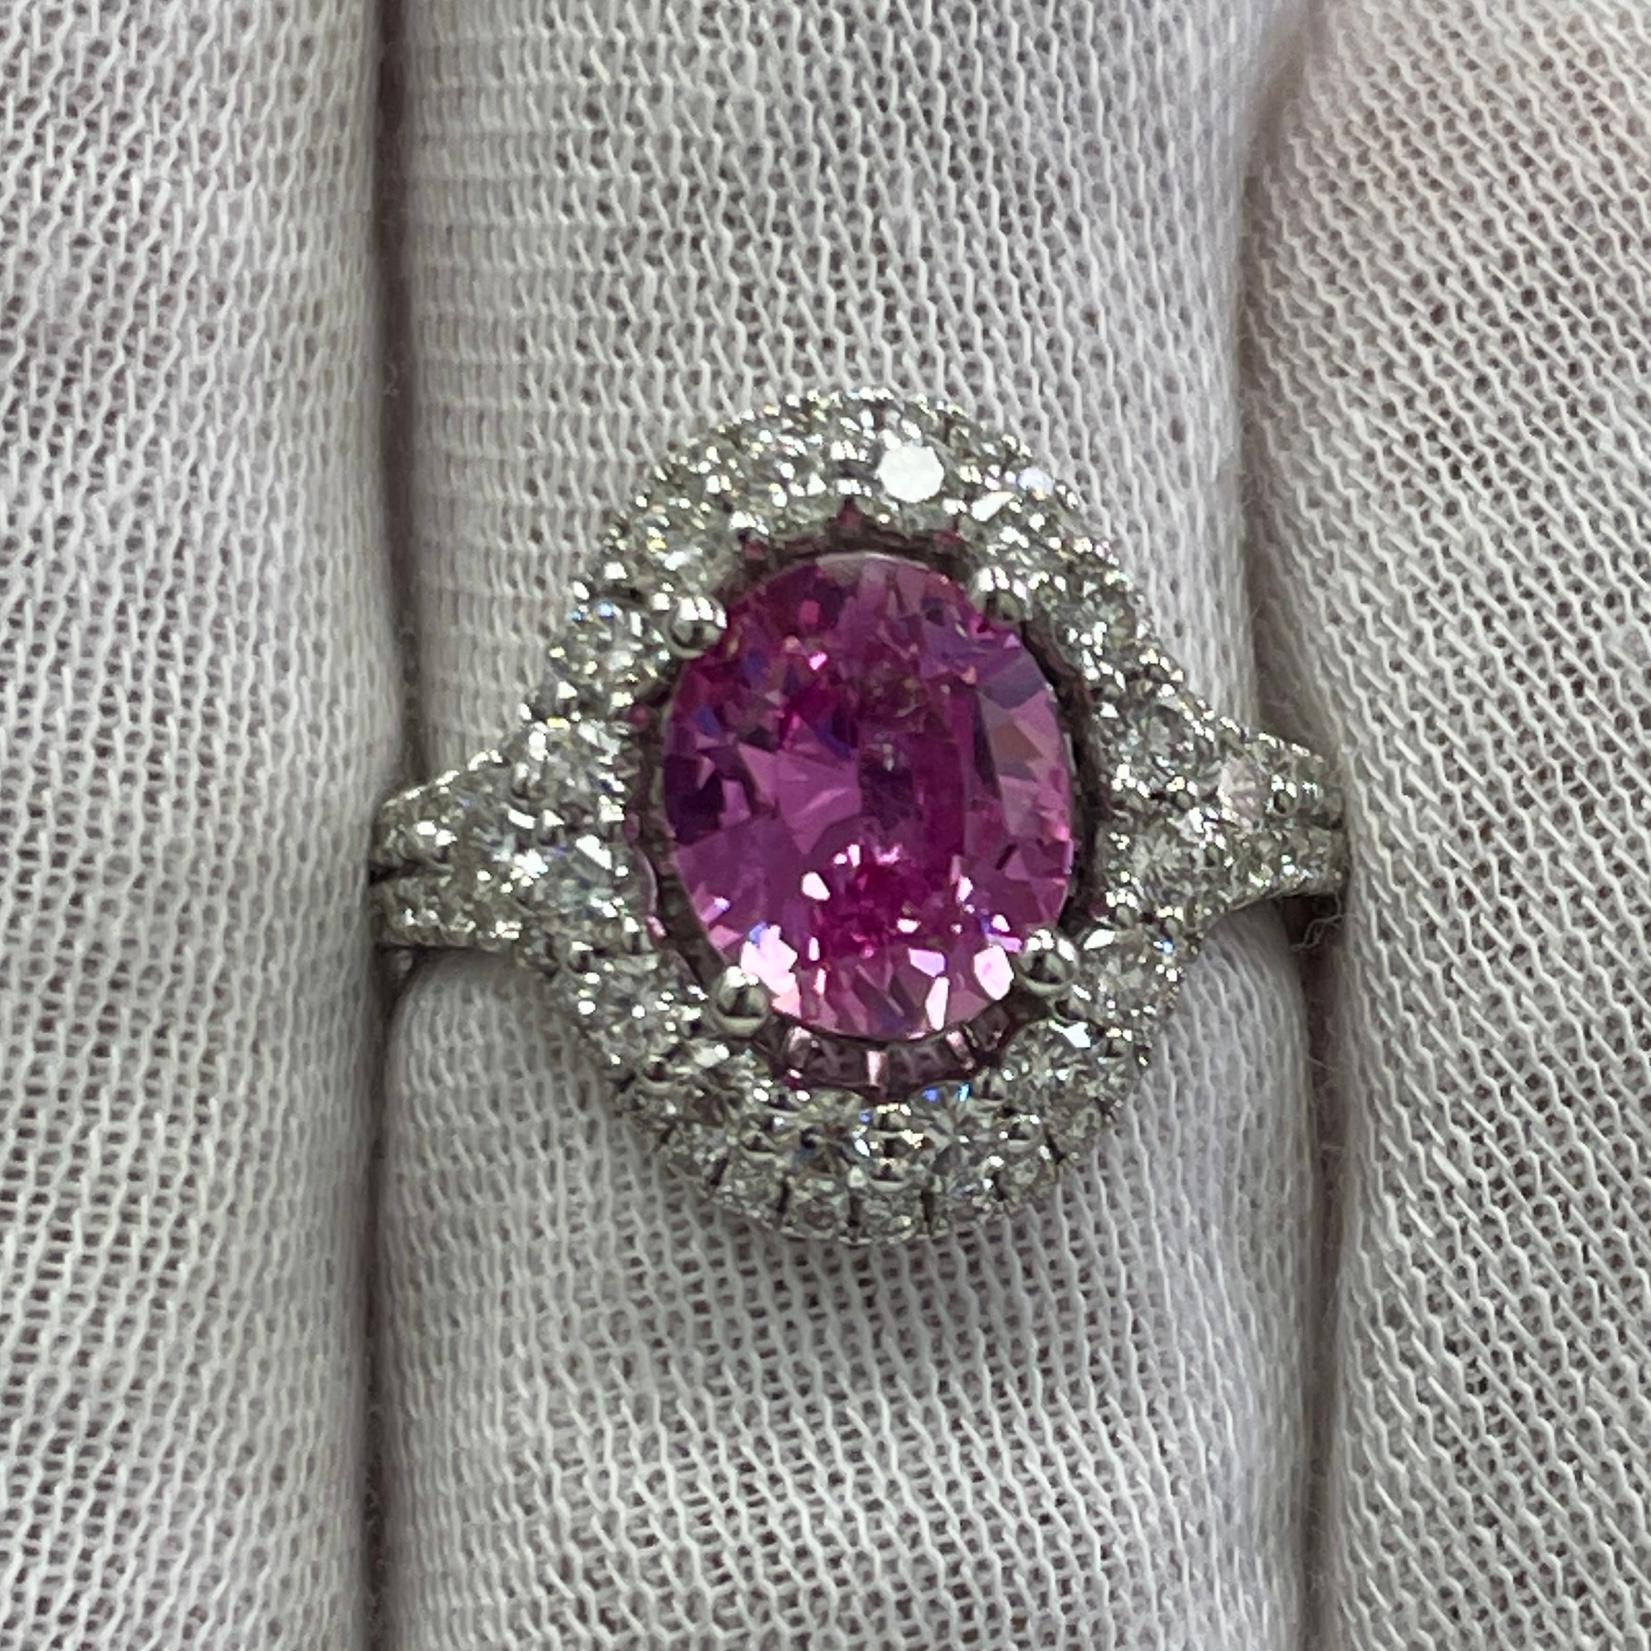 This is a BREATHTAKING pink sapphire with a bubble gum pink color, mounted in an elegant 18K white gold and diamond ring with 0.1.15Ct of brilliant white diamonds. Suitable for any occasion!